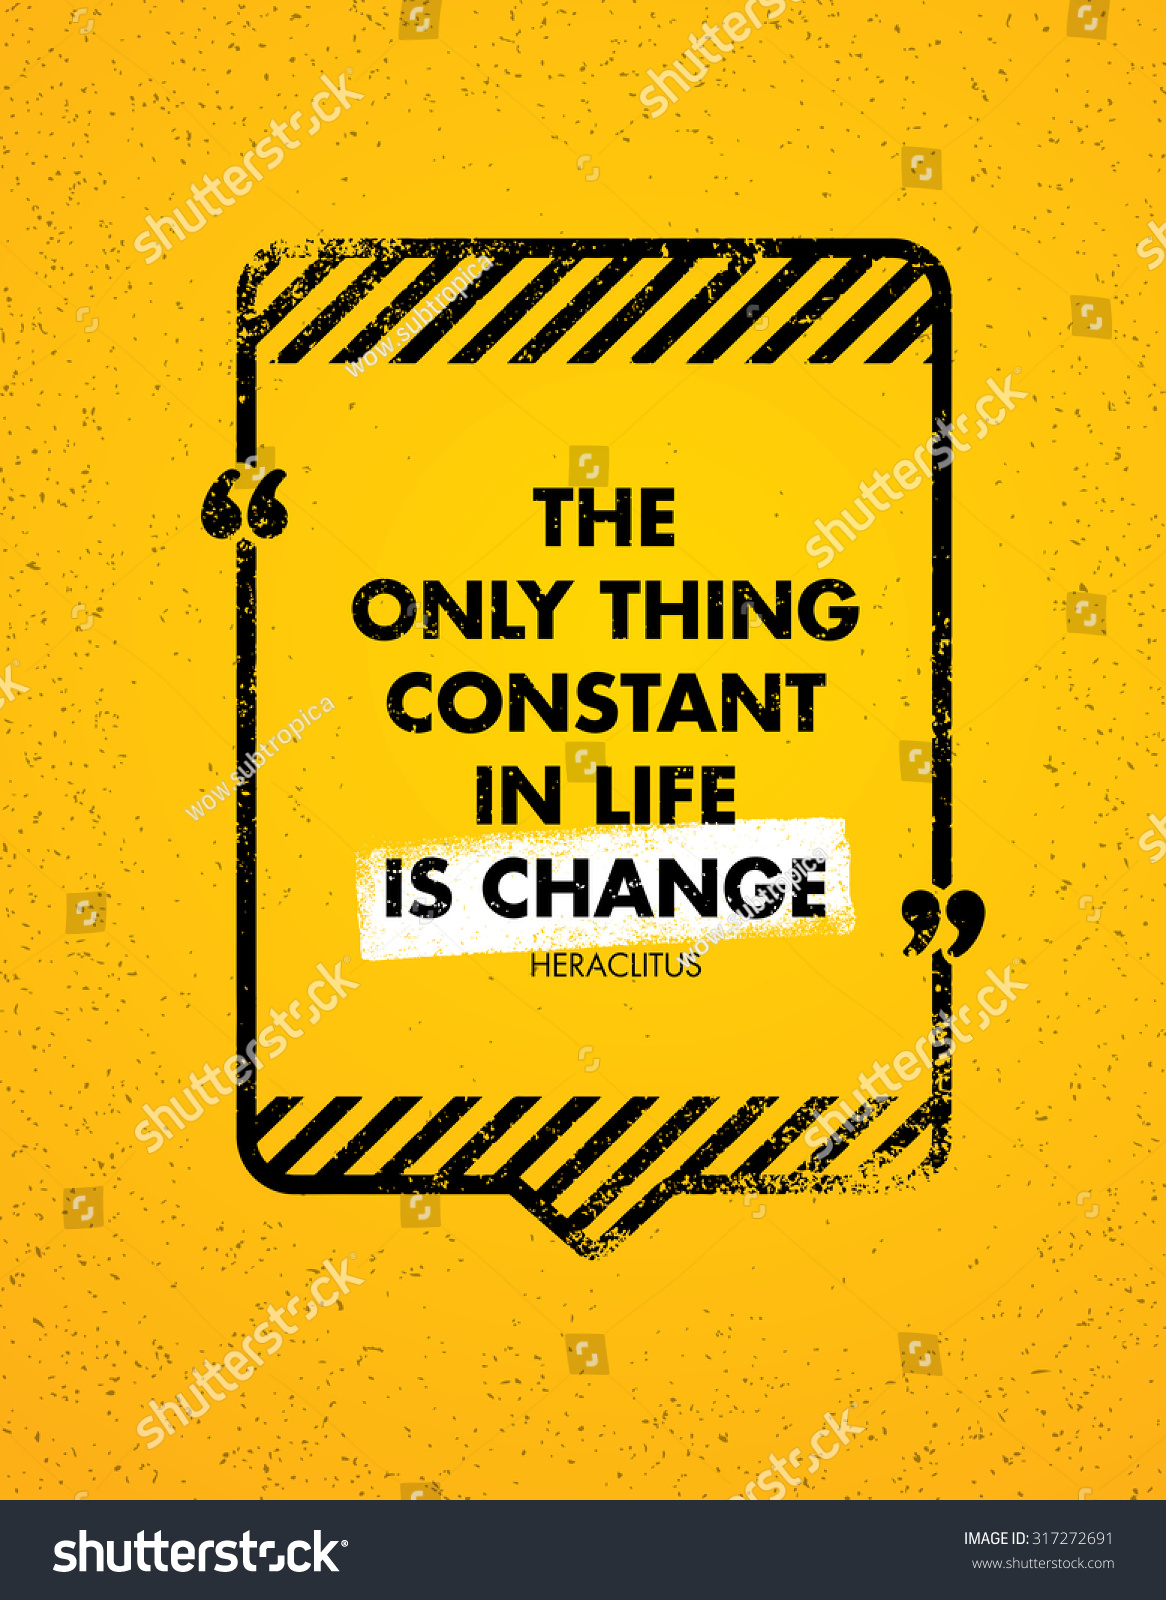 The ly Constant Thing In Life Is Change Inspiring Creative Motivation Quote Vector Typography